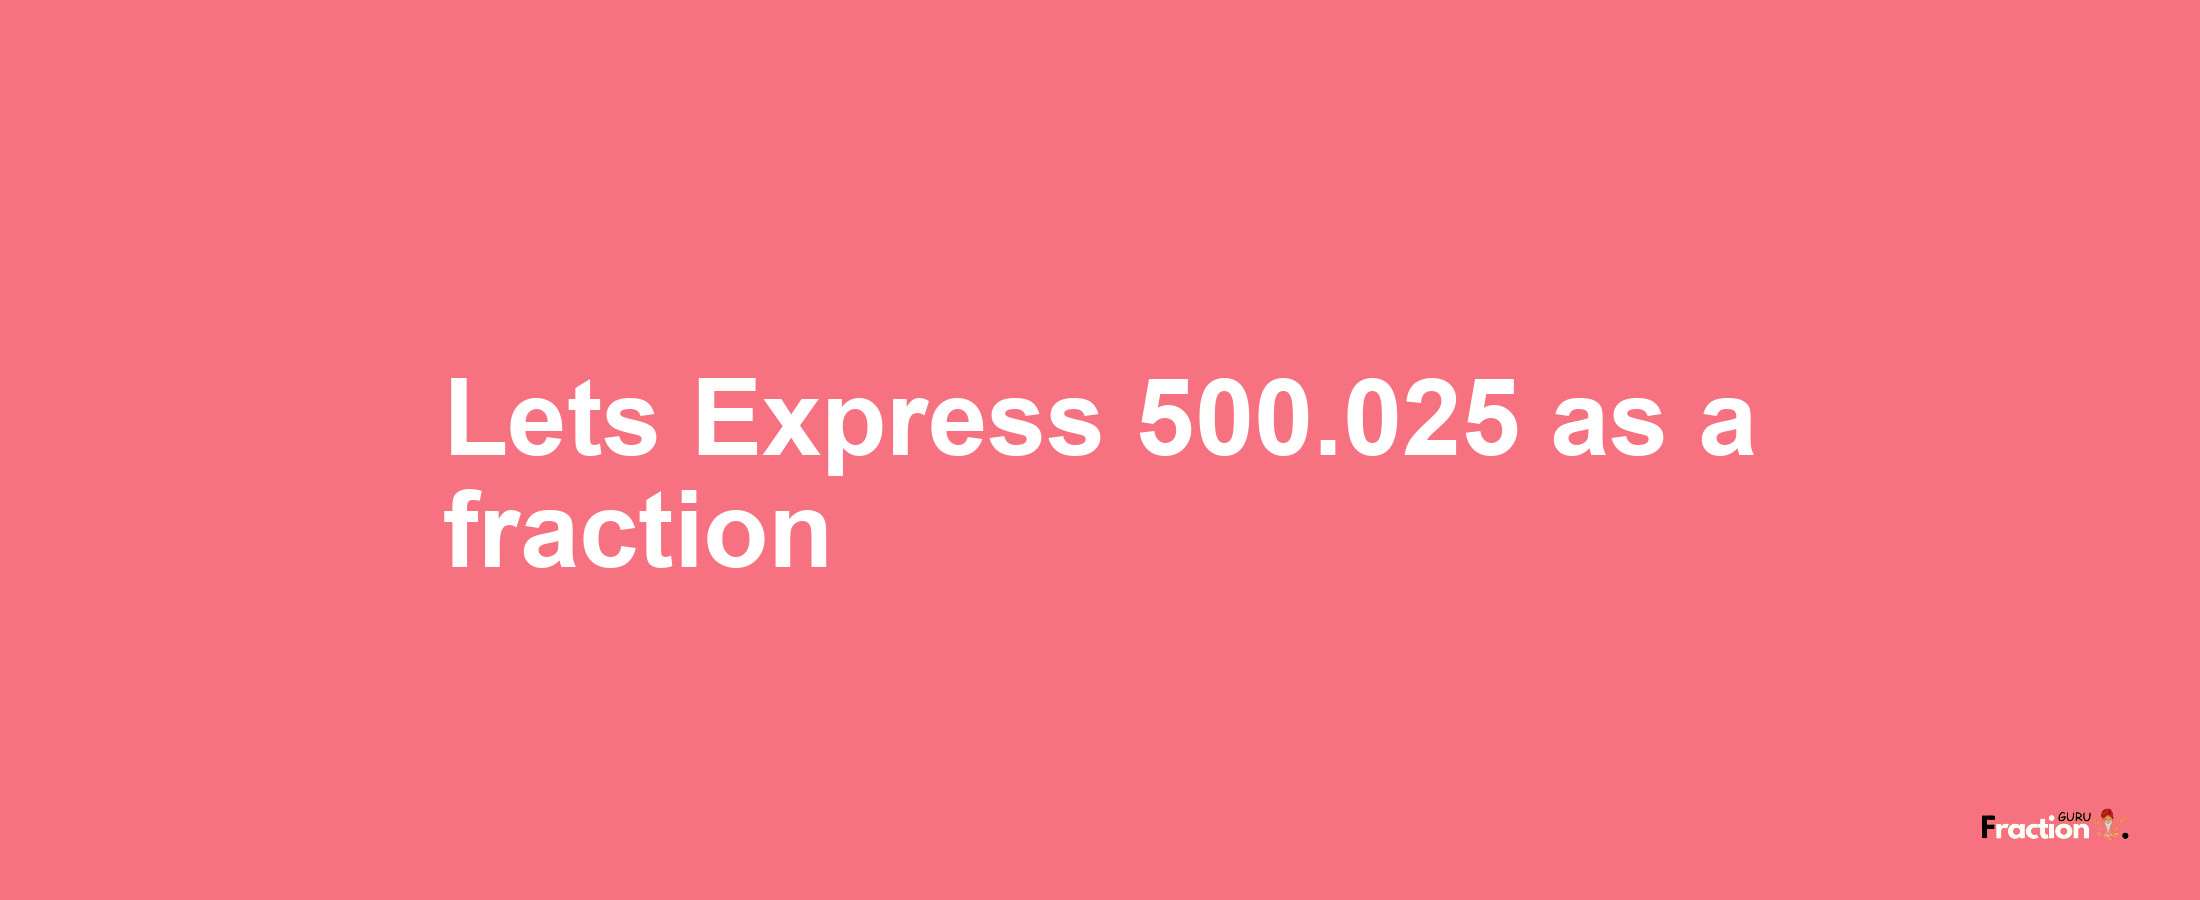 Lets Express 500.025 as afraction